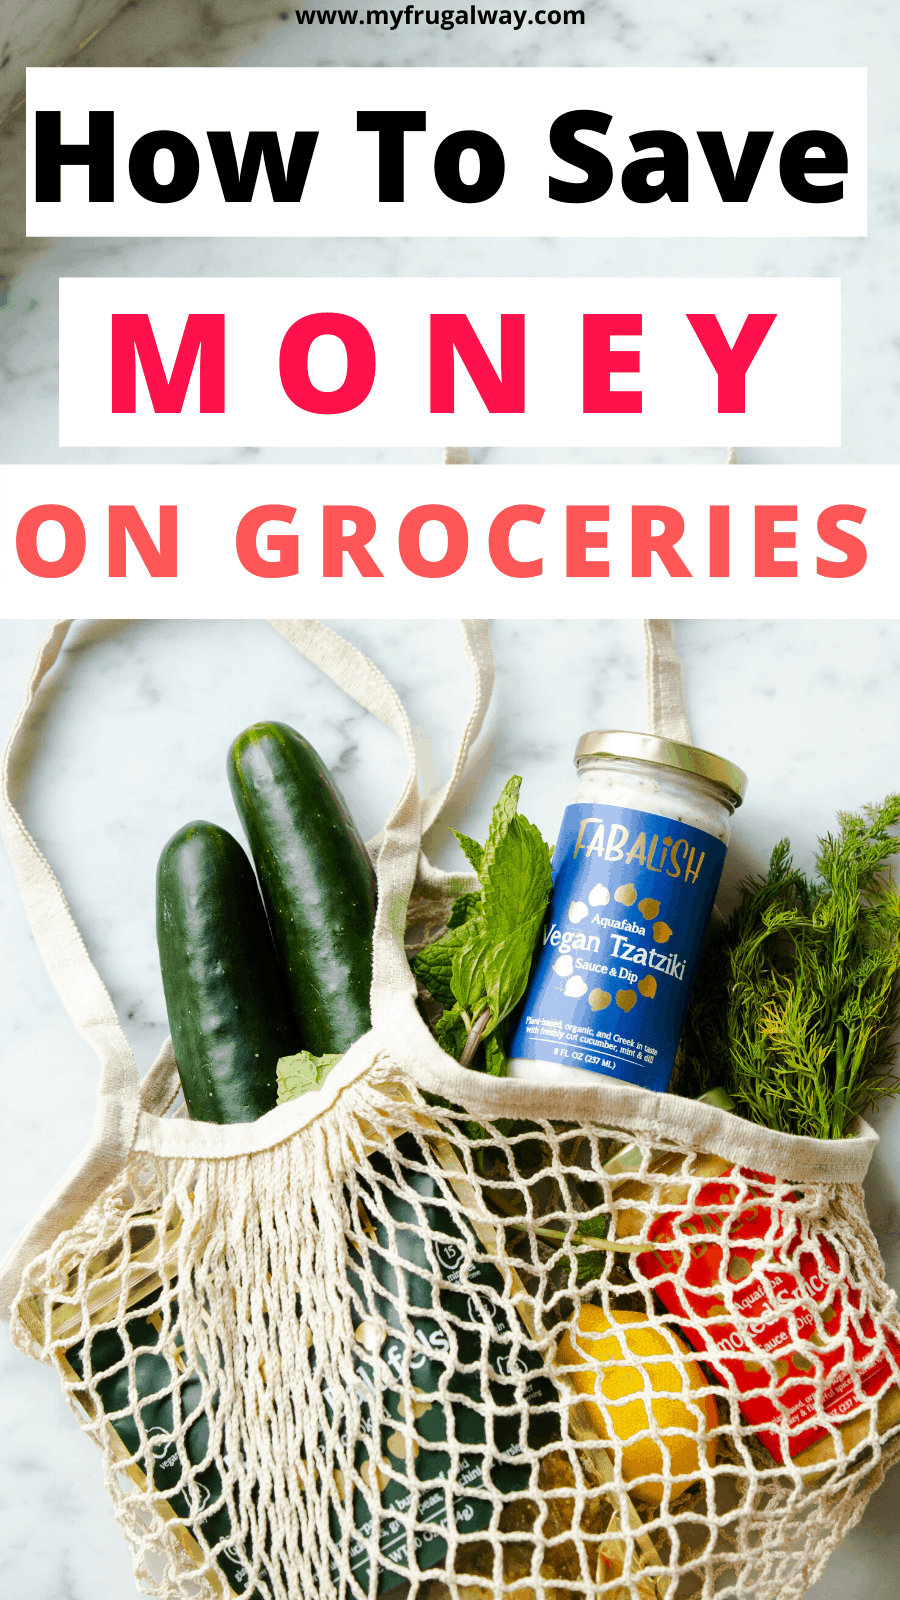 Frugal living tips to save money on groceries. Best tips for grocery shopping on a budget. #mealplanning #finance #savemoney